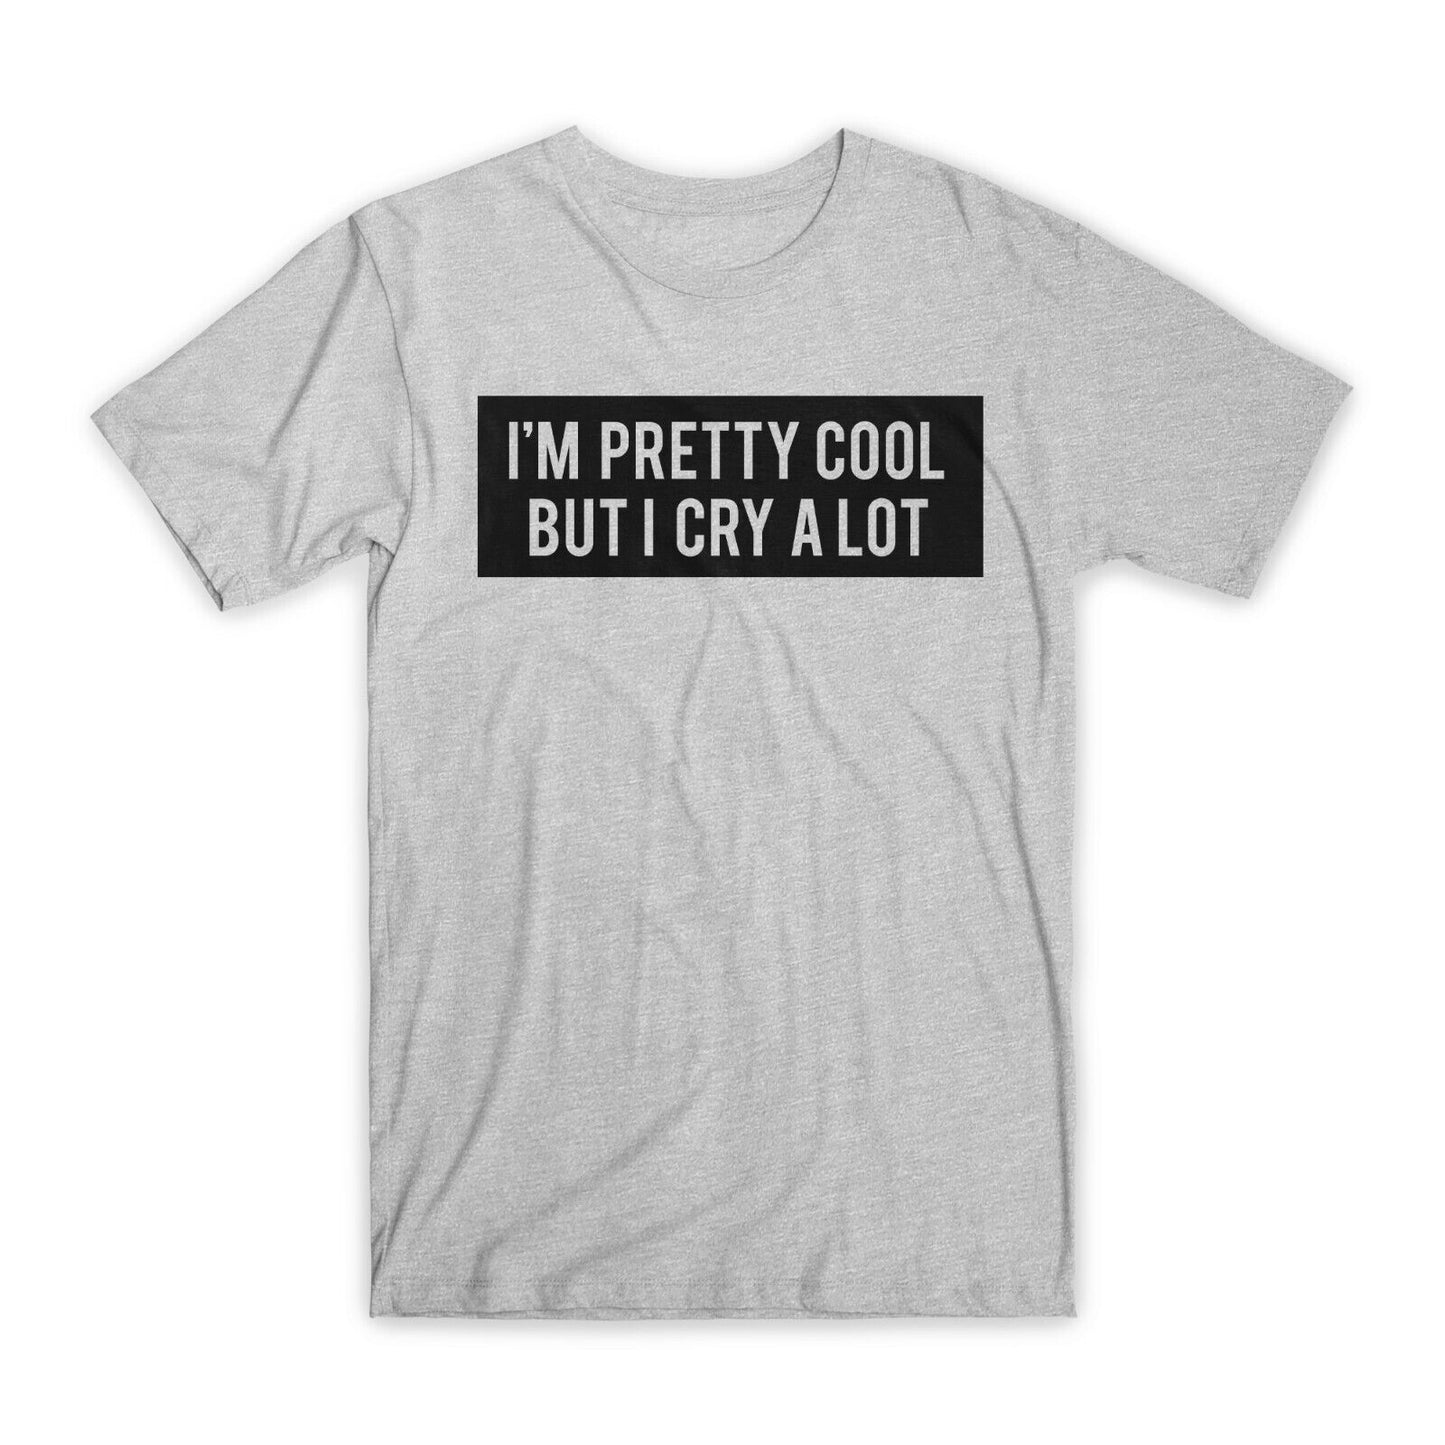 I'm Pretty Cool But I Cry A Lot T-Shirt Premium Soft Cotton Funny Tees Gift NEW